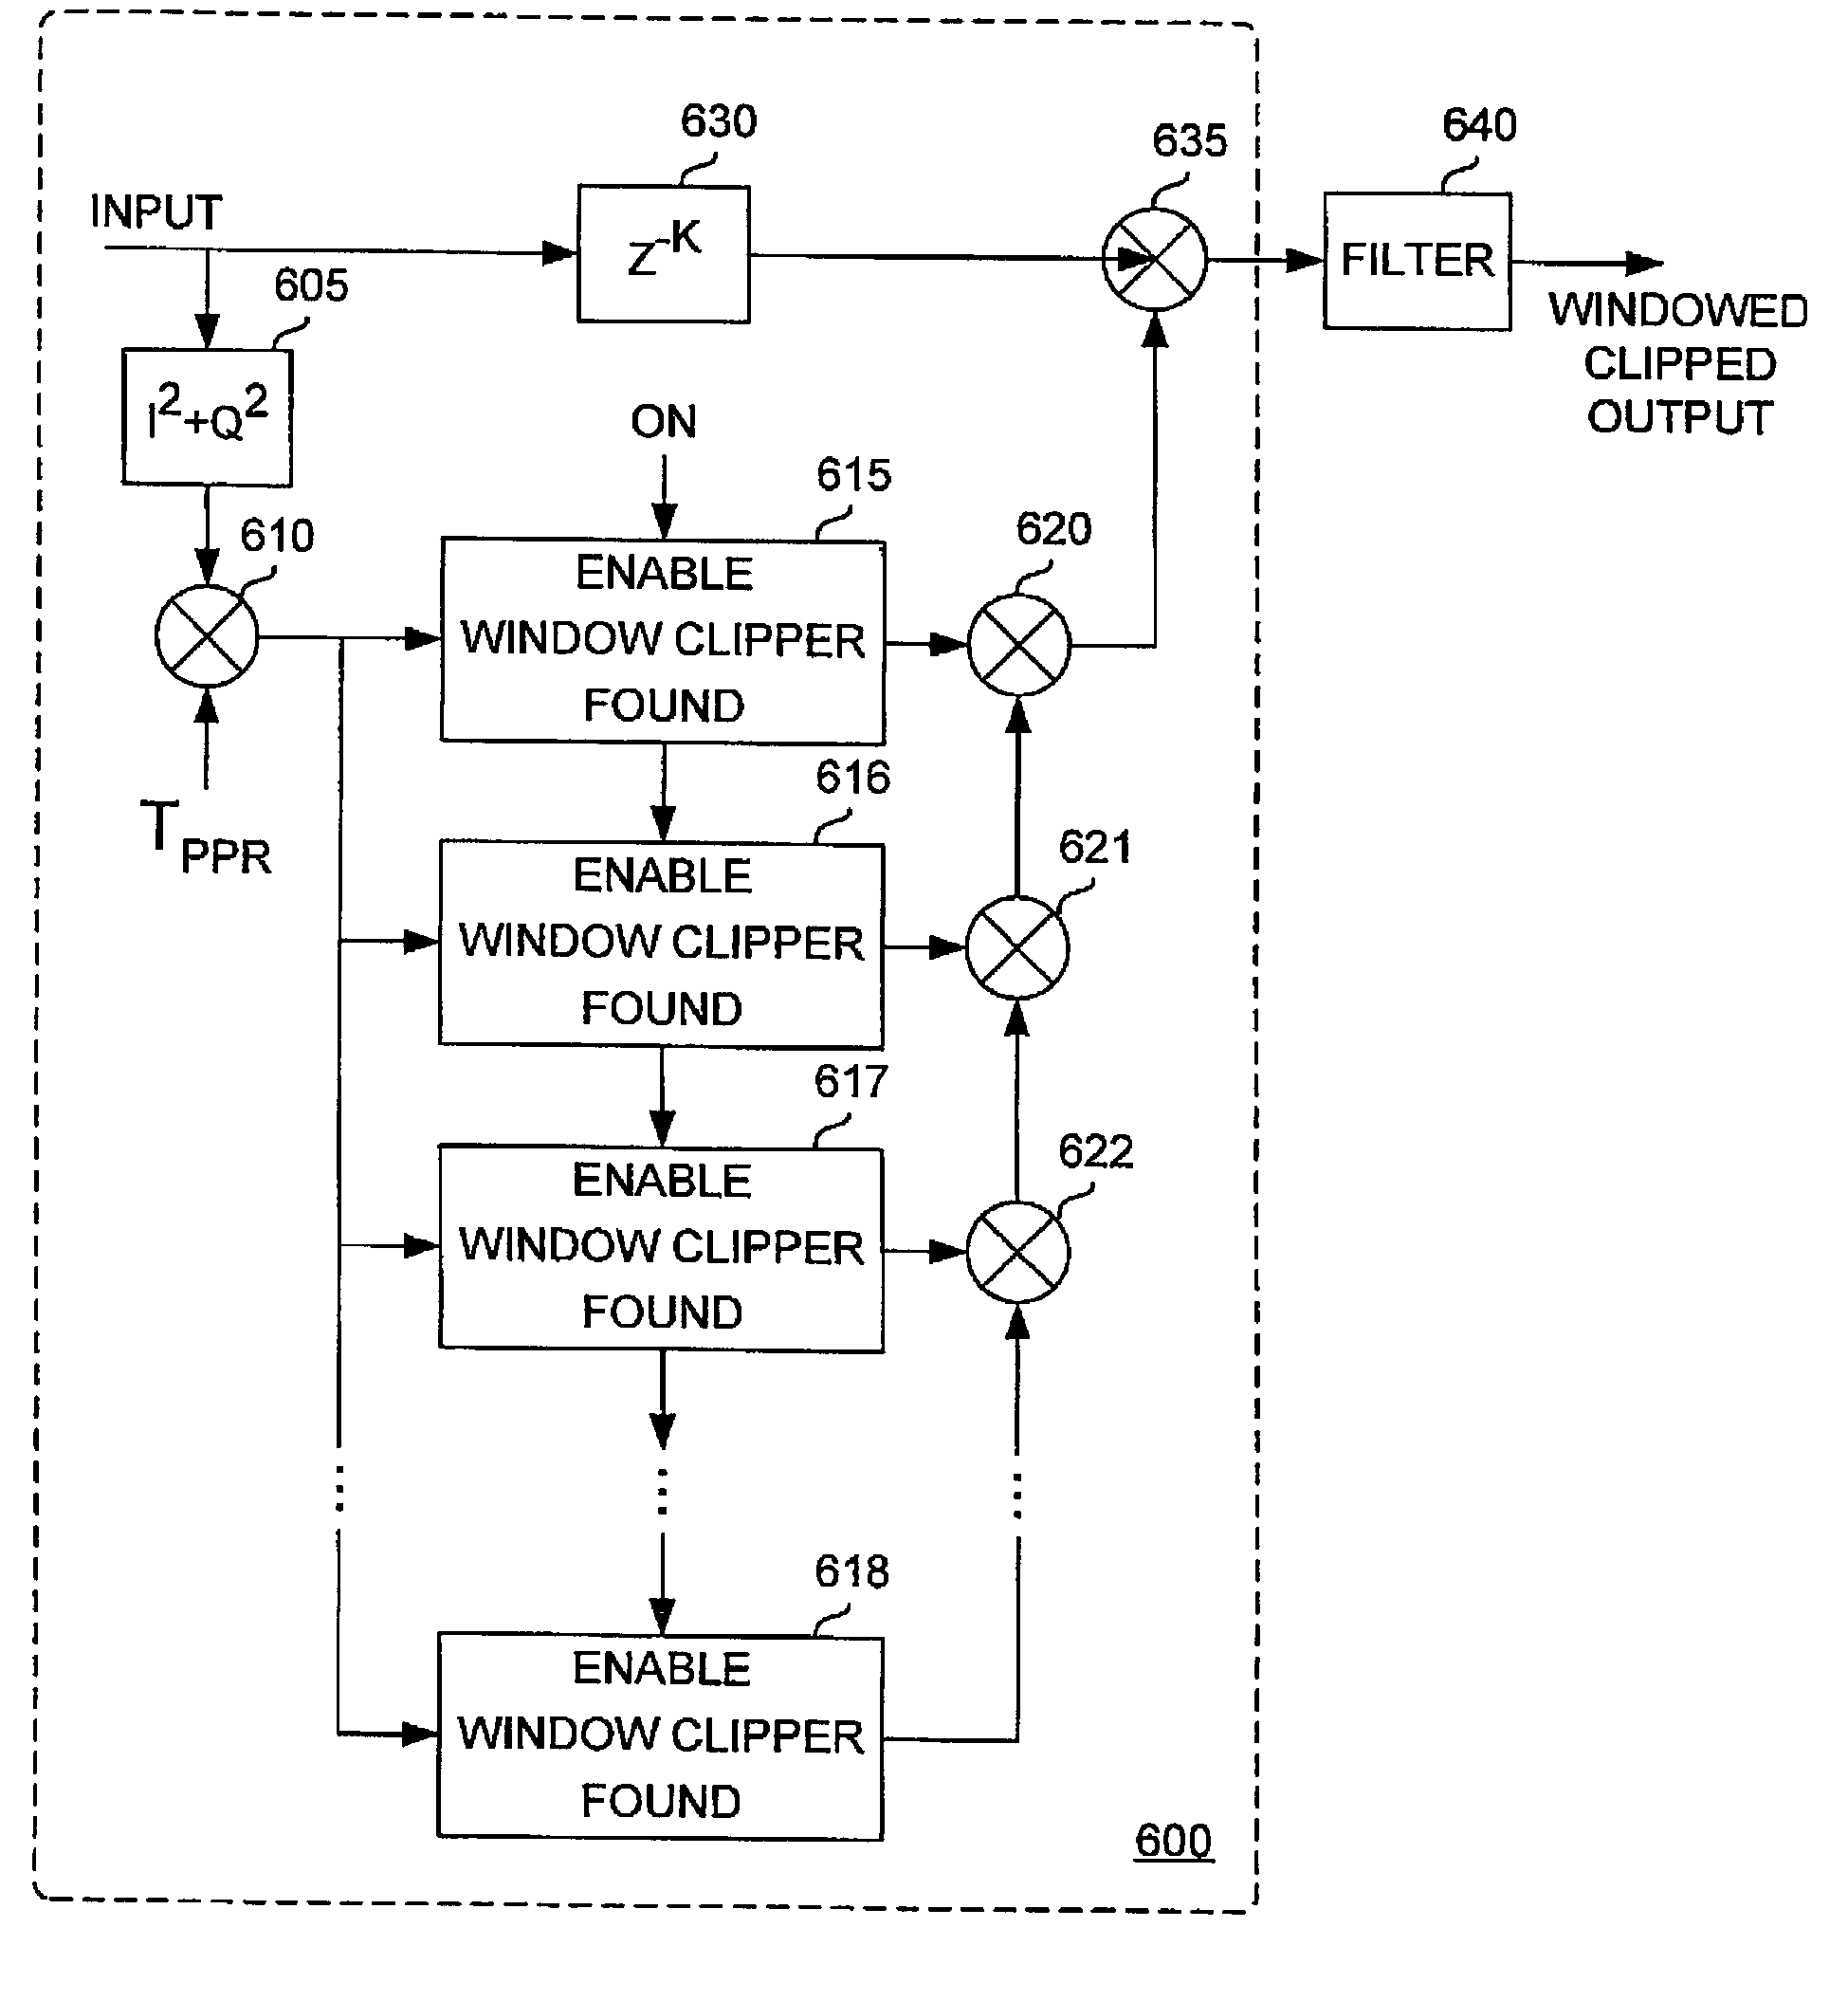 Peak power reduction using windowing and filtering